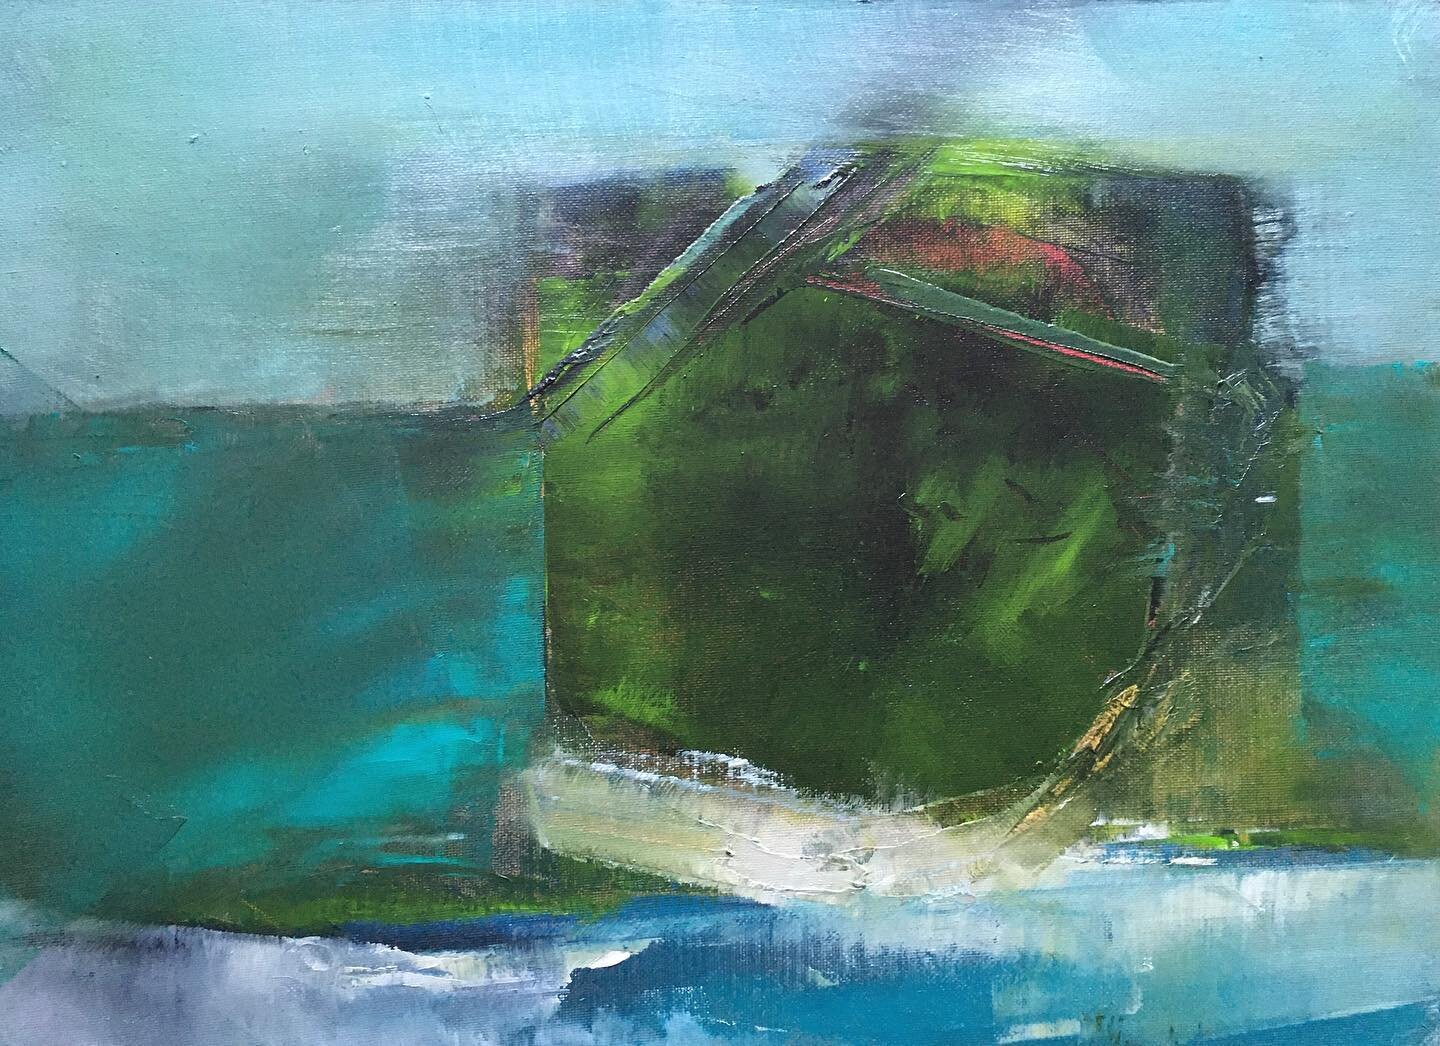 SMALL ISLAND ... Lush and away from it all......oil  on board 25x36cm...
More on my website: 
www.louise-holgate.com
All enquiries welcome
#buyartonline
#abstractmag  #highgateart  #janenewberydulwich #chelseaartsclub #affordableartfairuk #somerset #